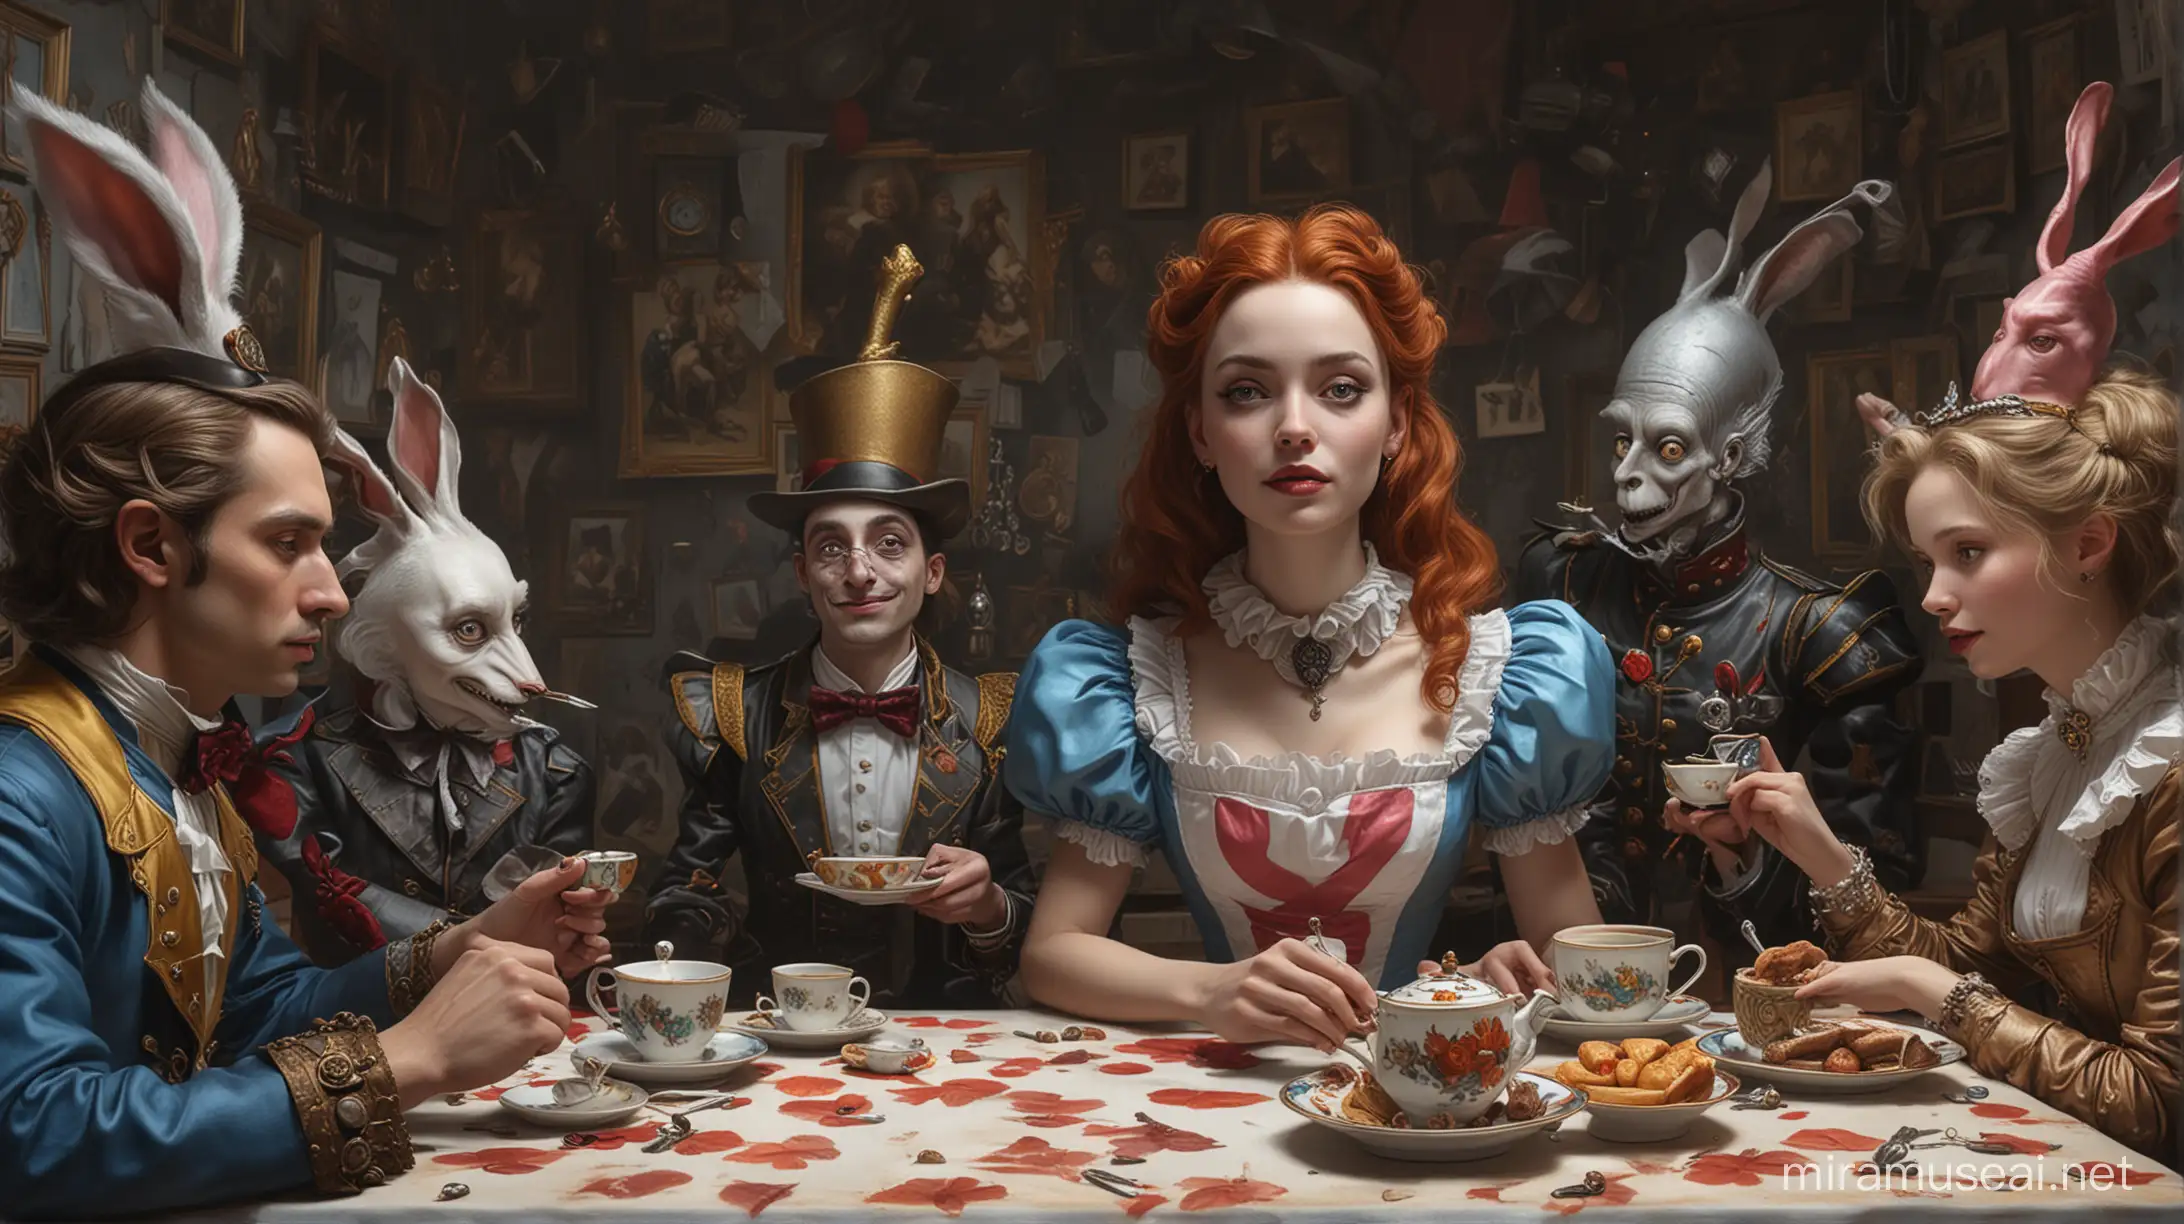 Surreal Cyberpunk Tea Party with Alice in Wonderland Theme